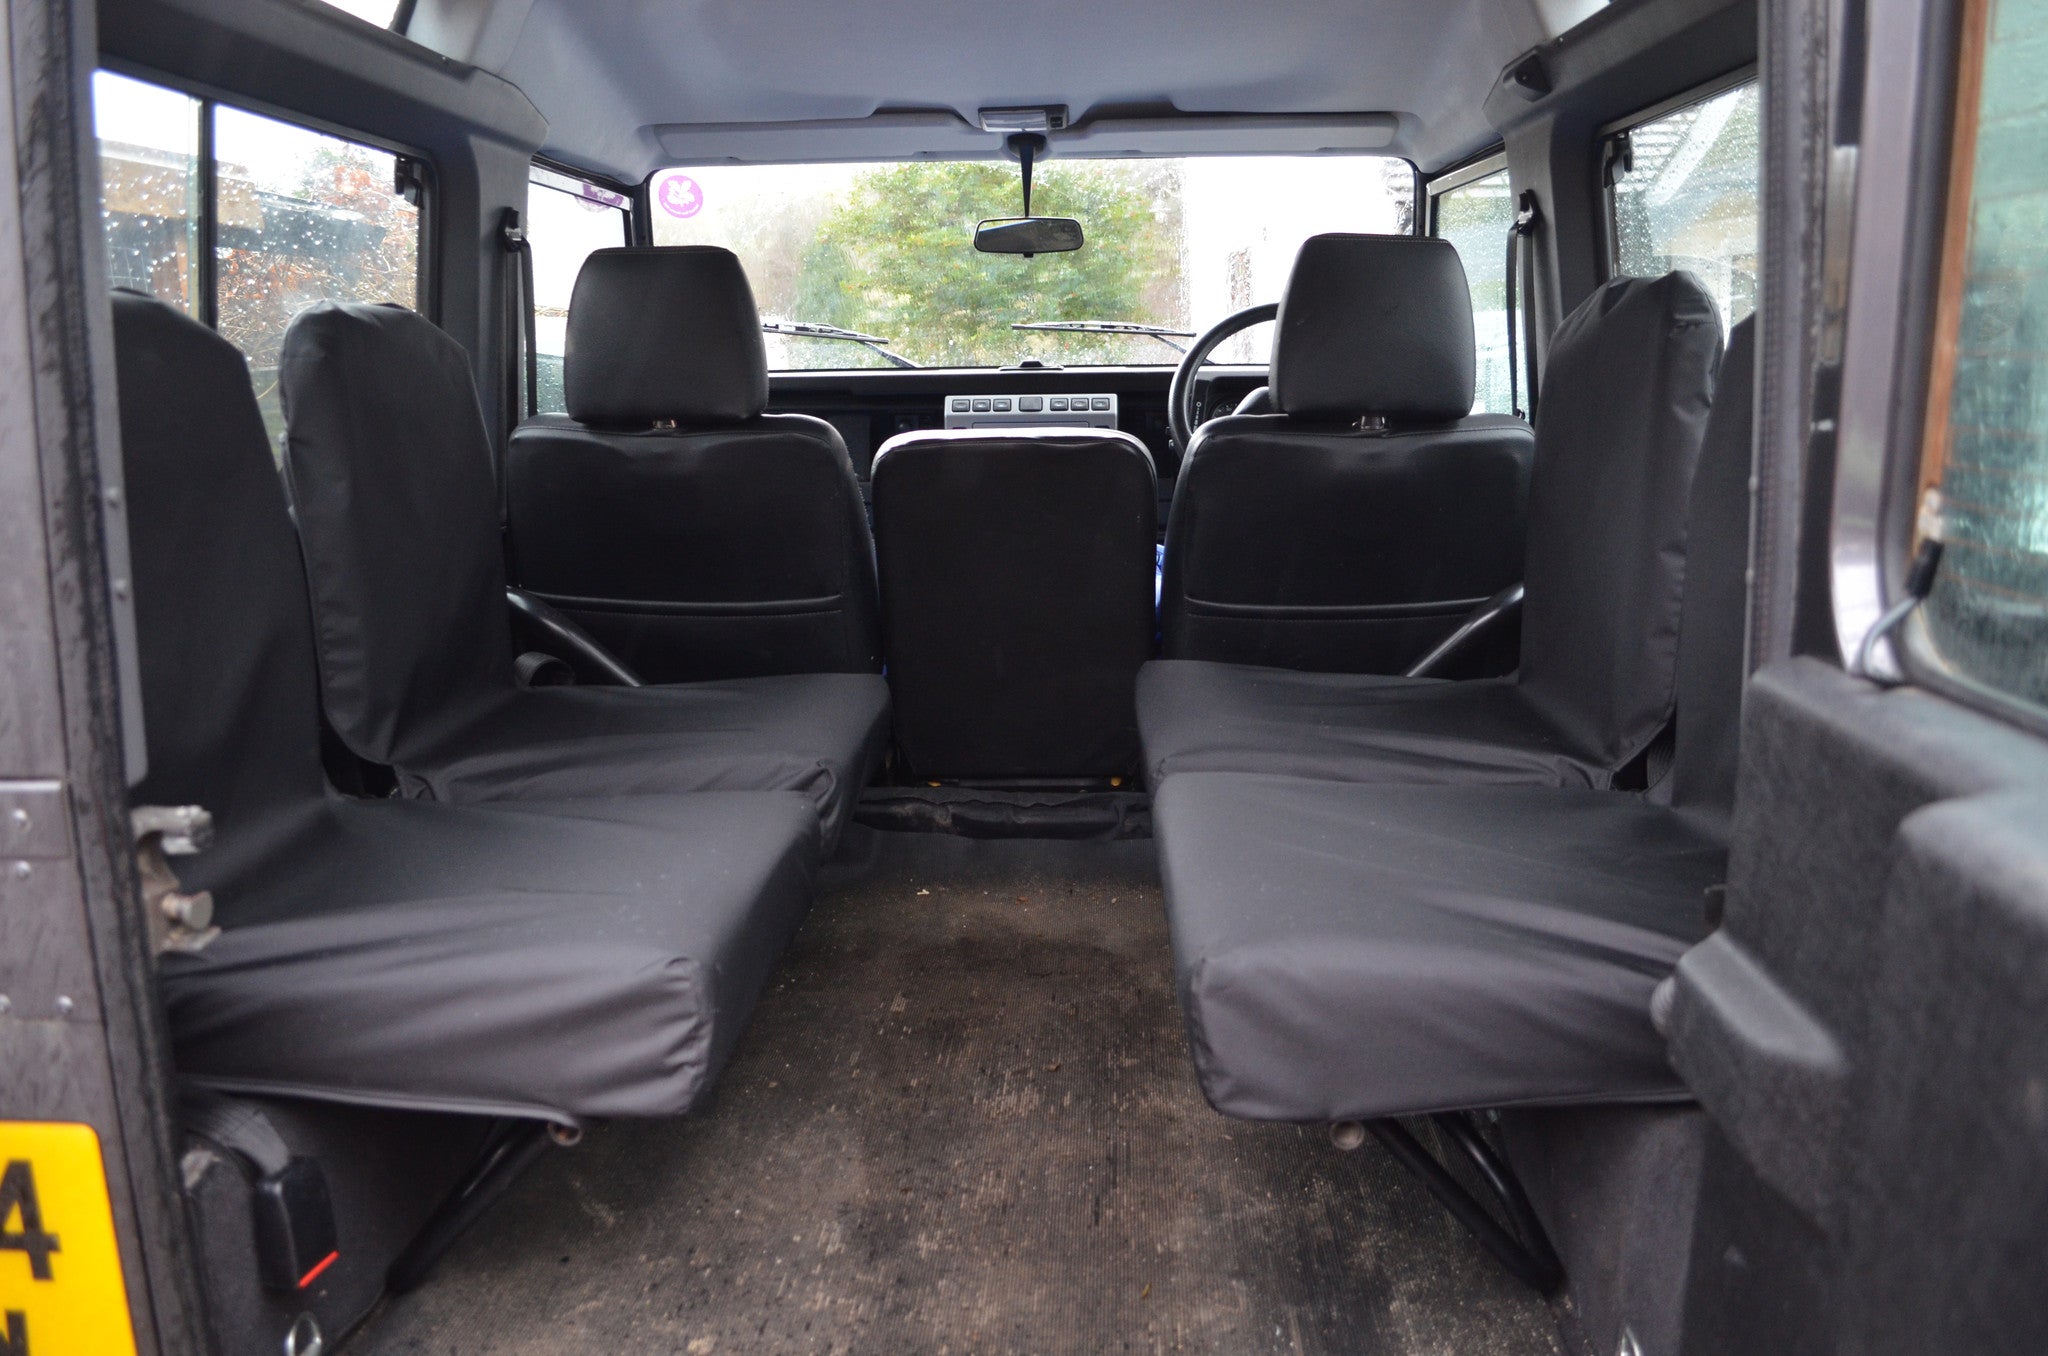 Land Rover Defender 1983 - 2007 Rear Seat Covers Set of 4 Dicky Seats / Black Turtle Covers Ltd